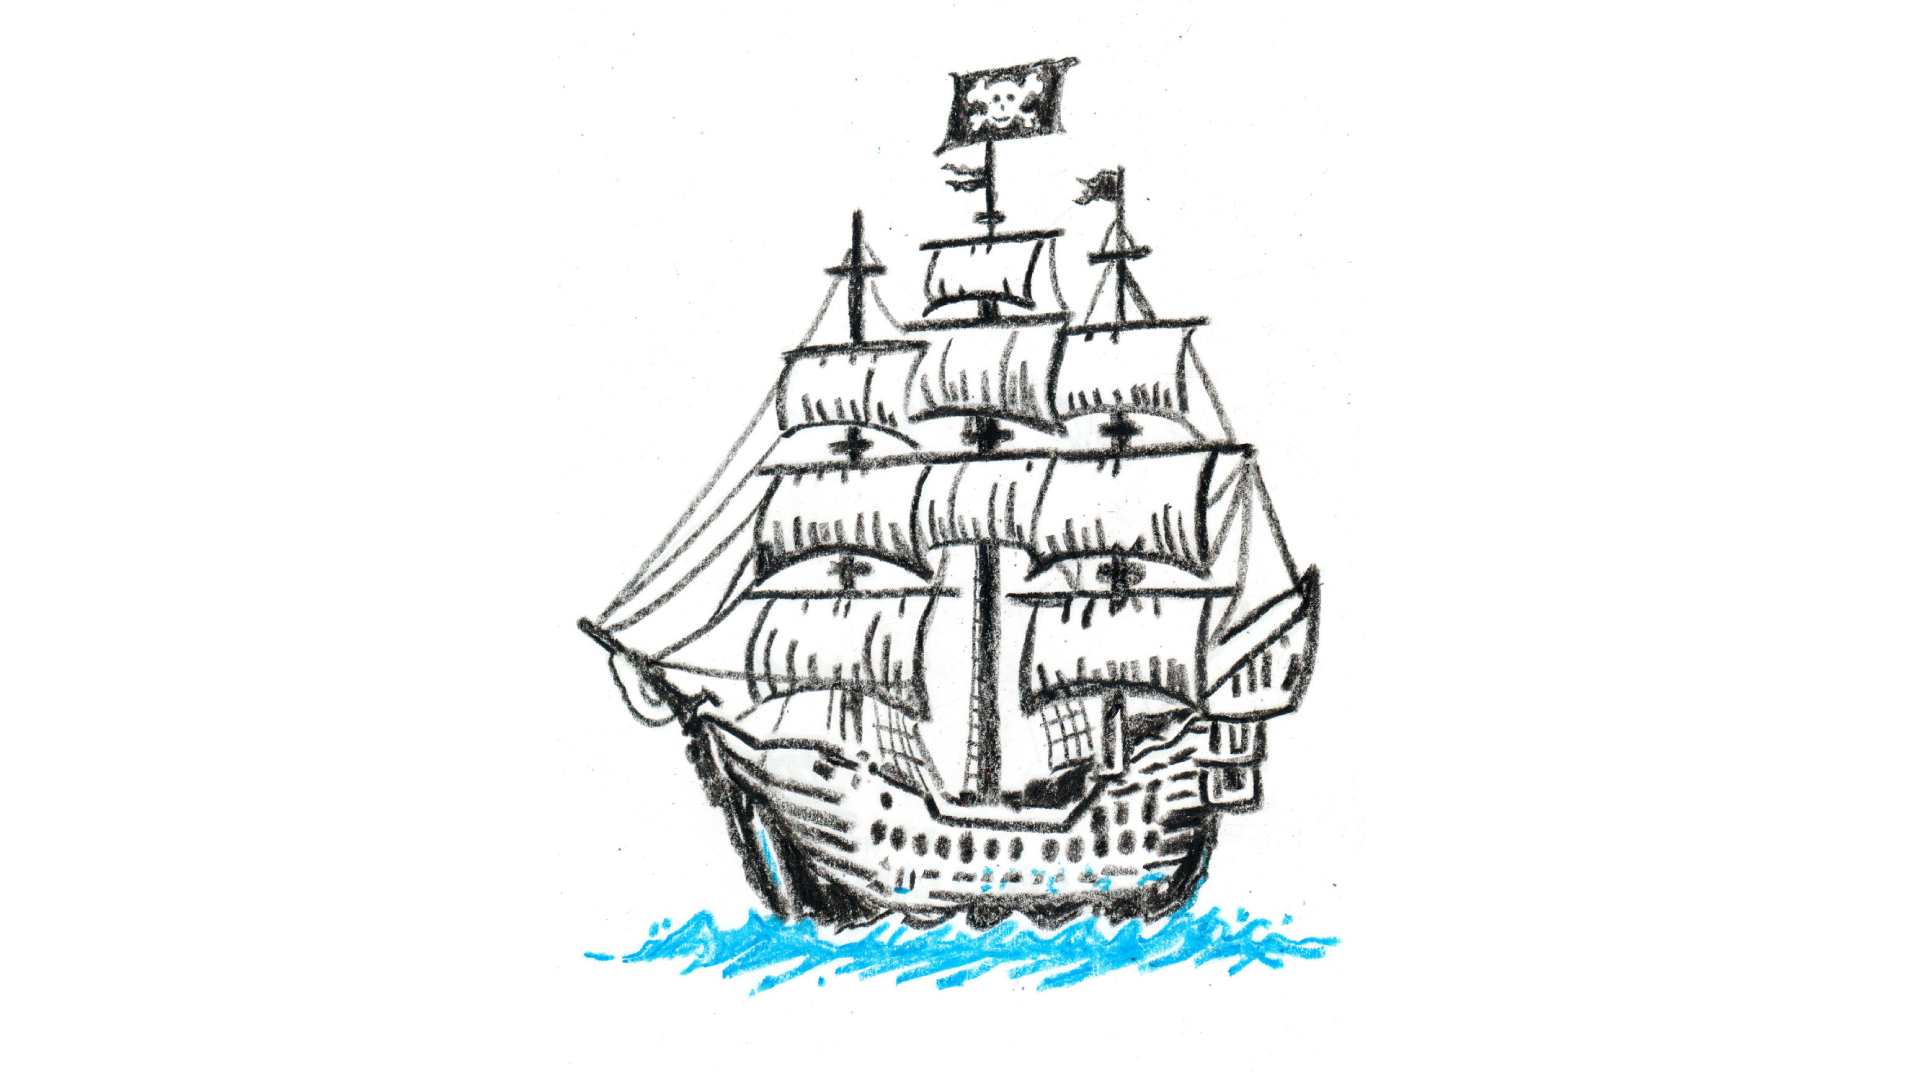 An Illustration of a Pirate Ship